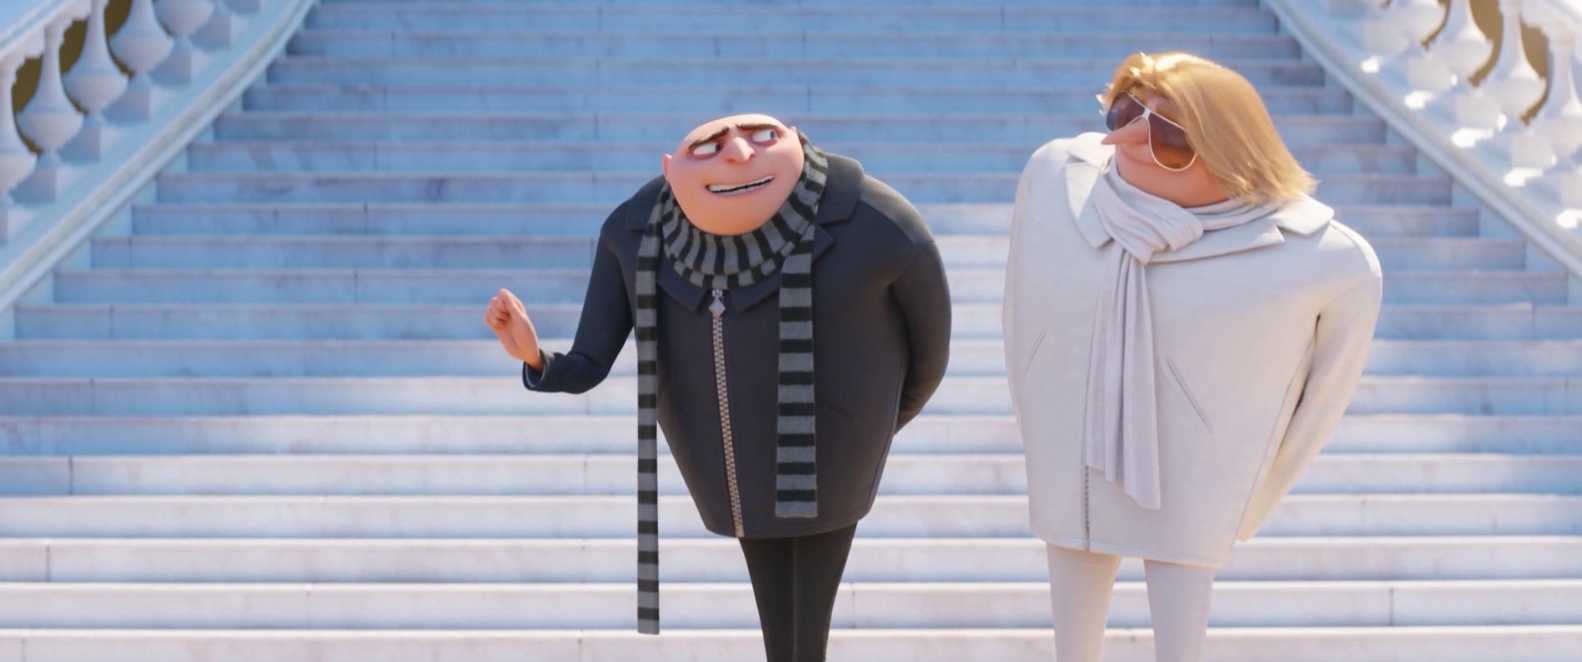 Despicable Me 3 Movie Review